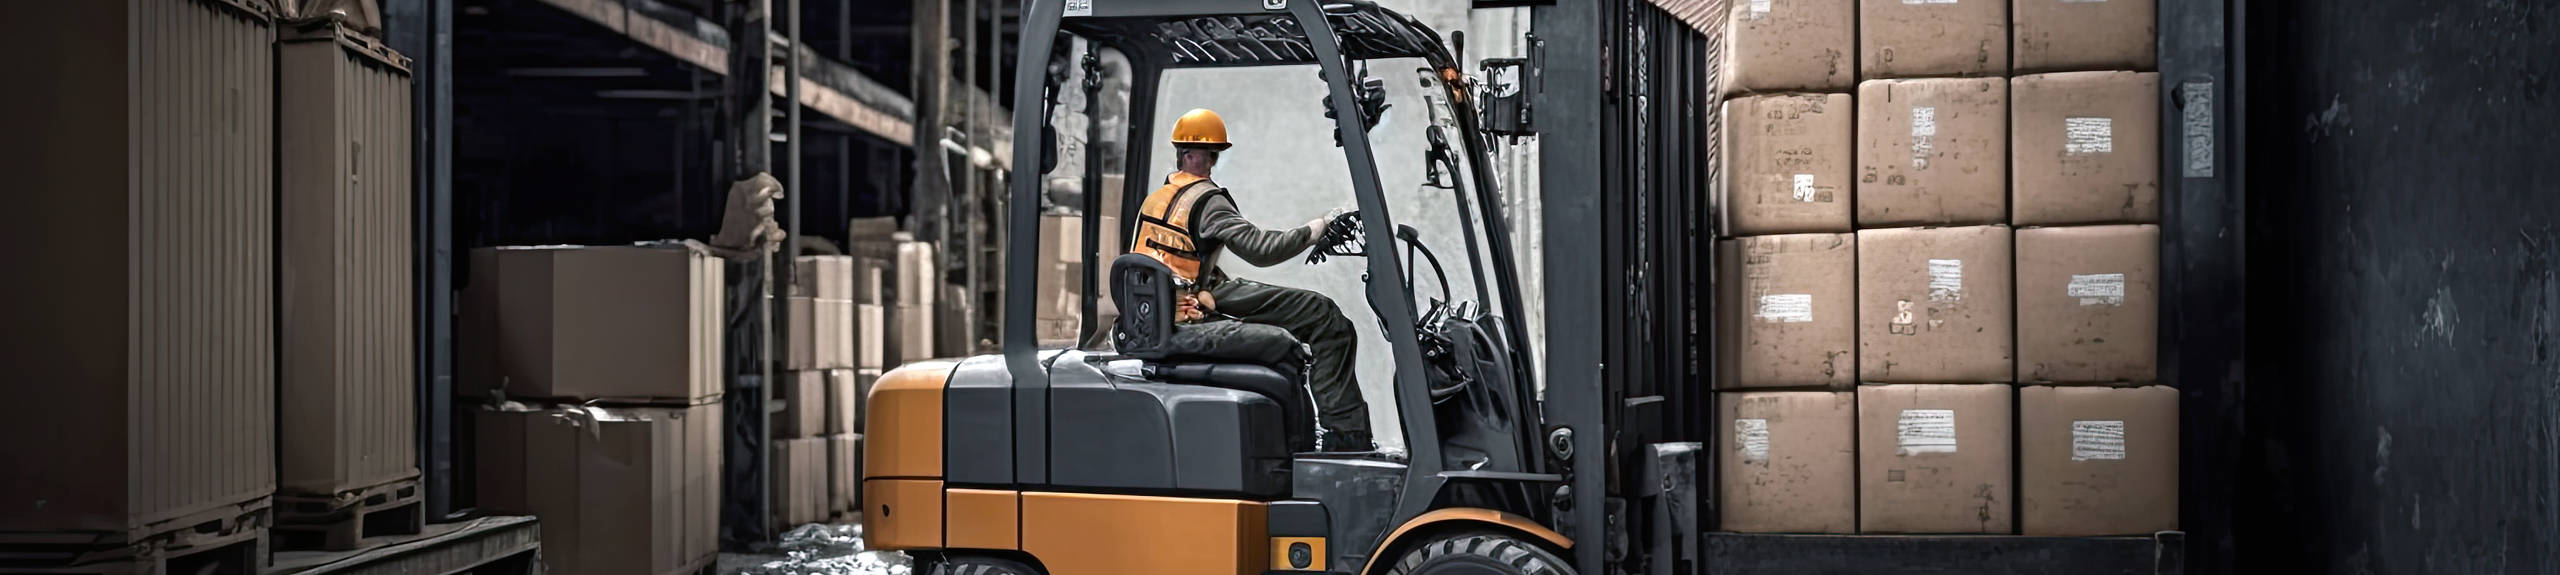 An orange forklift truck with a driver wearing high visibility gear carries a pallet of packages outside a warehouse.